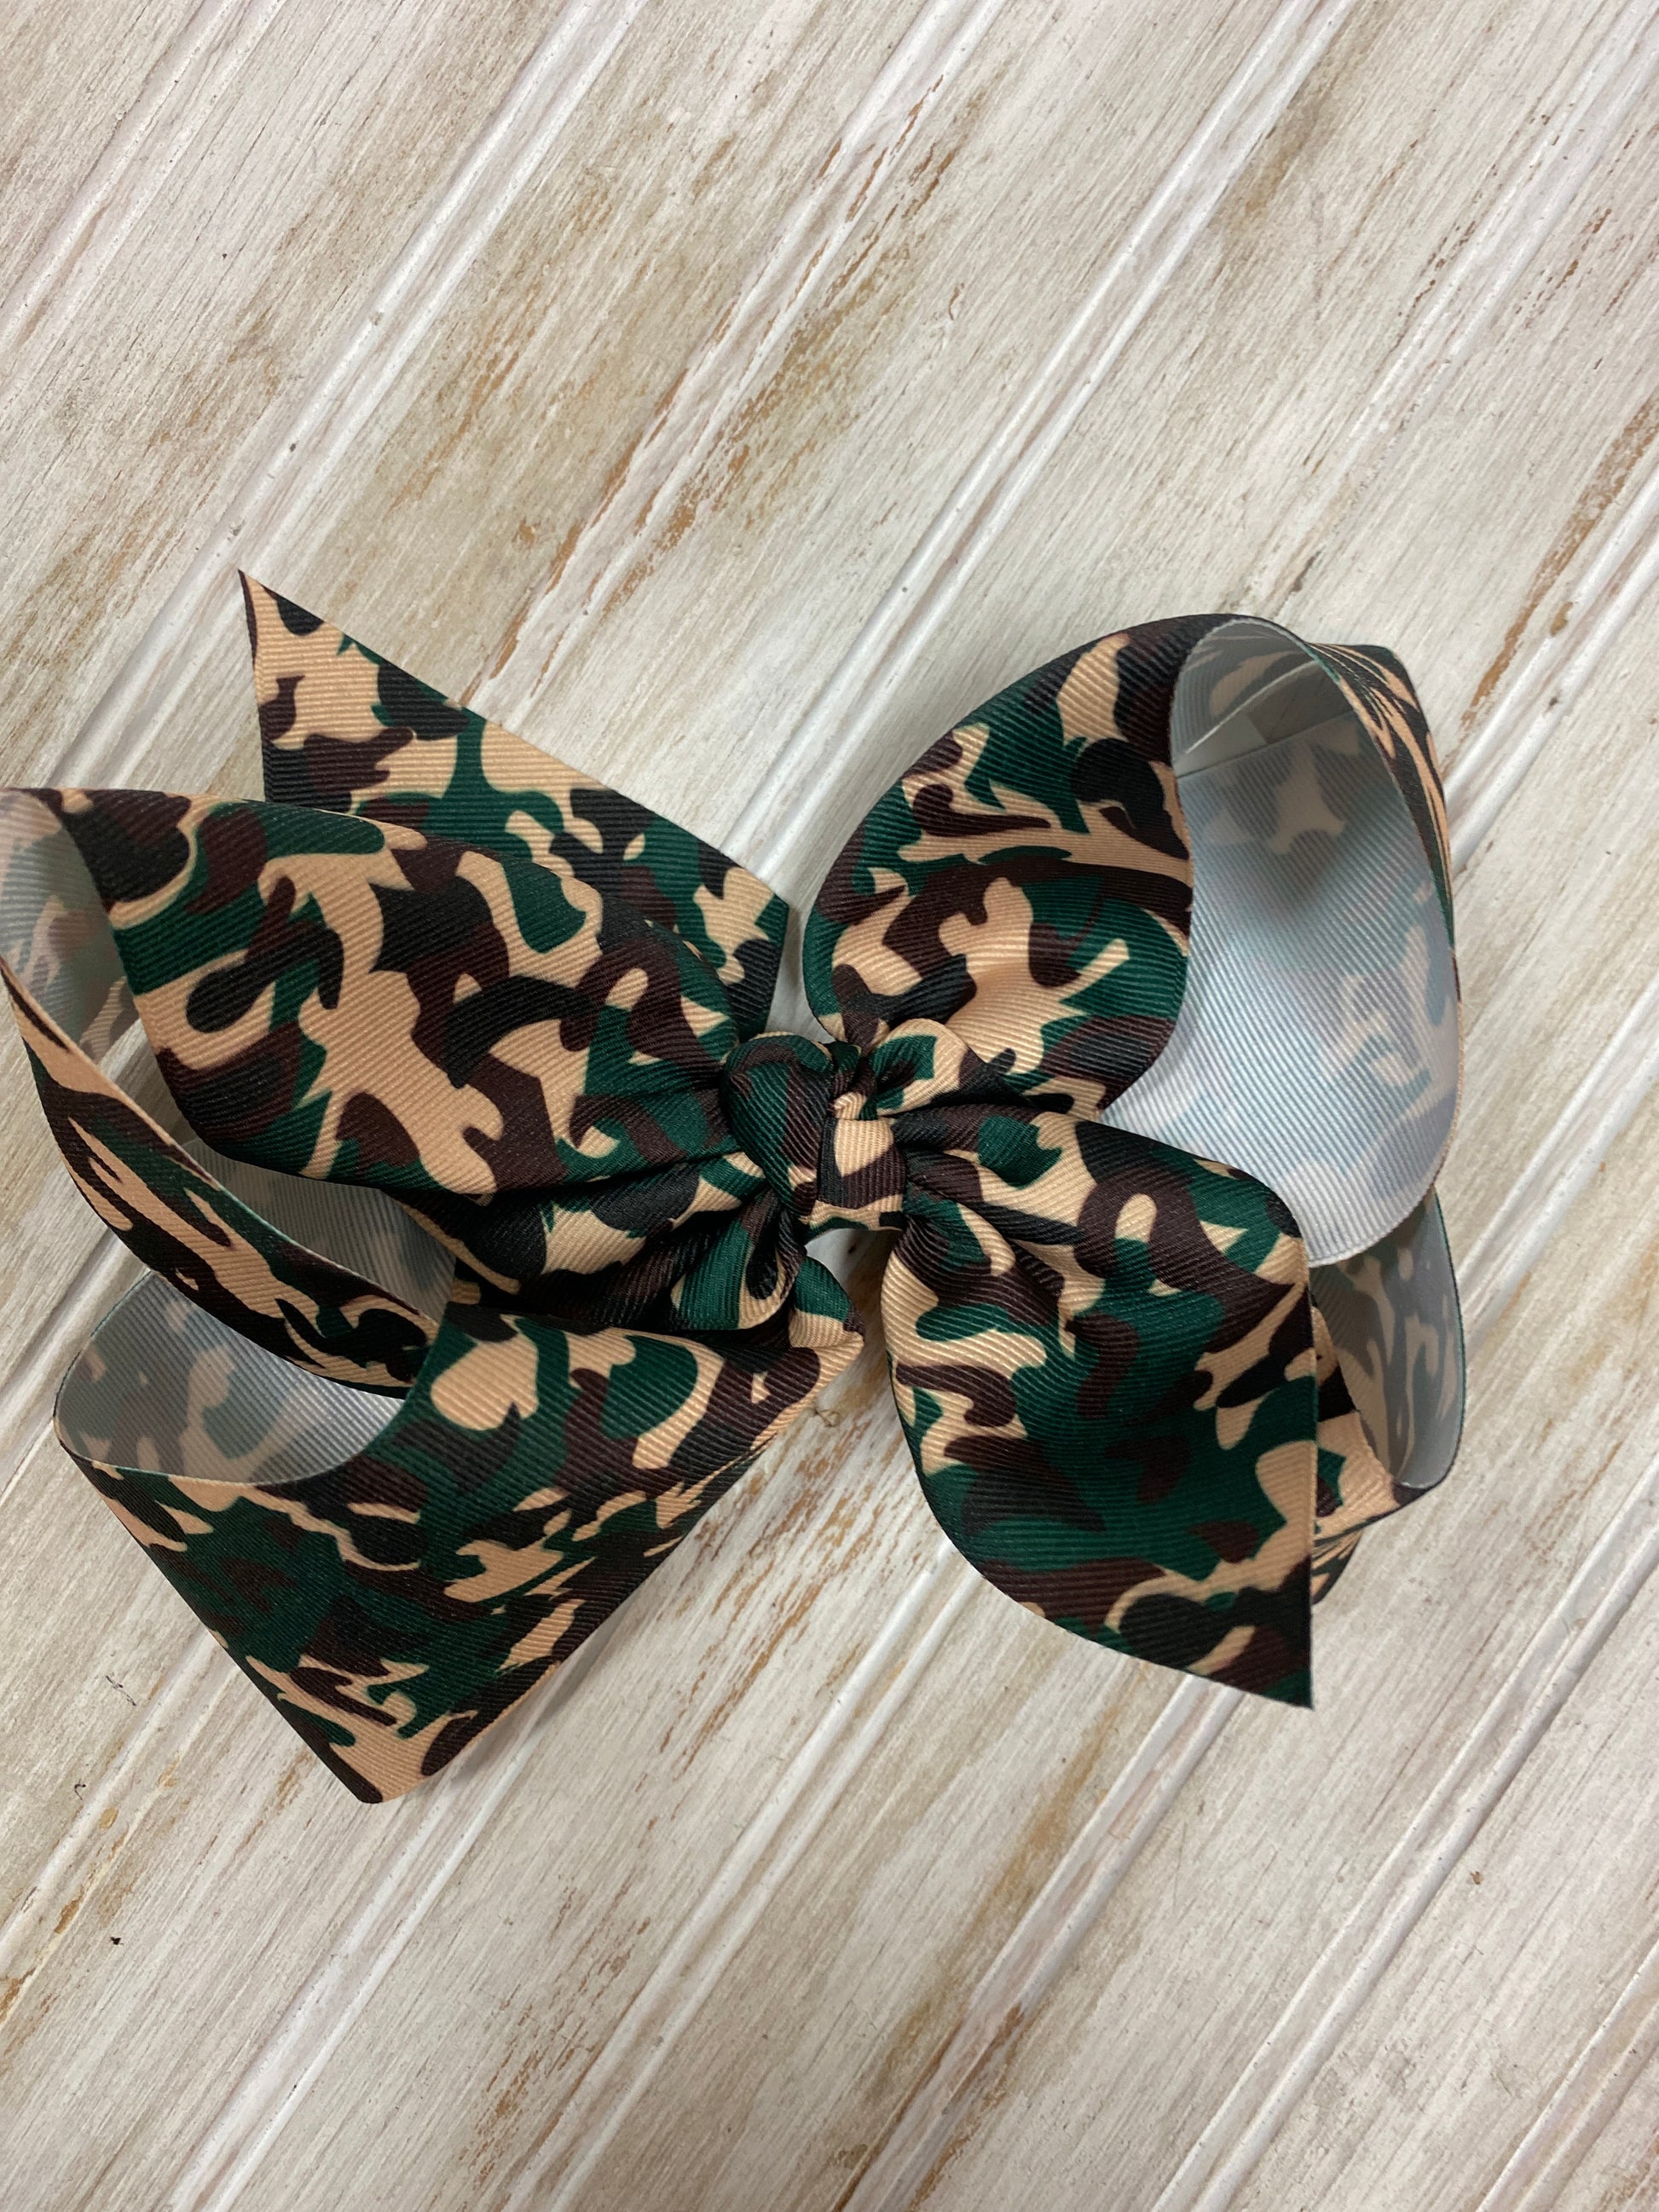 Texas Sized Bow in Camo  - Doodlebug's Children's Boutique